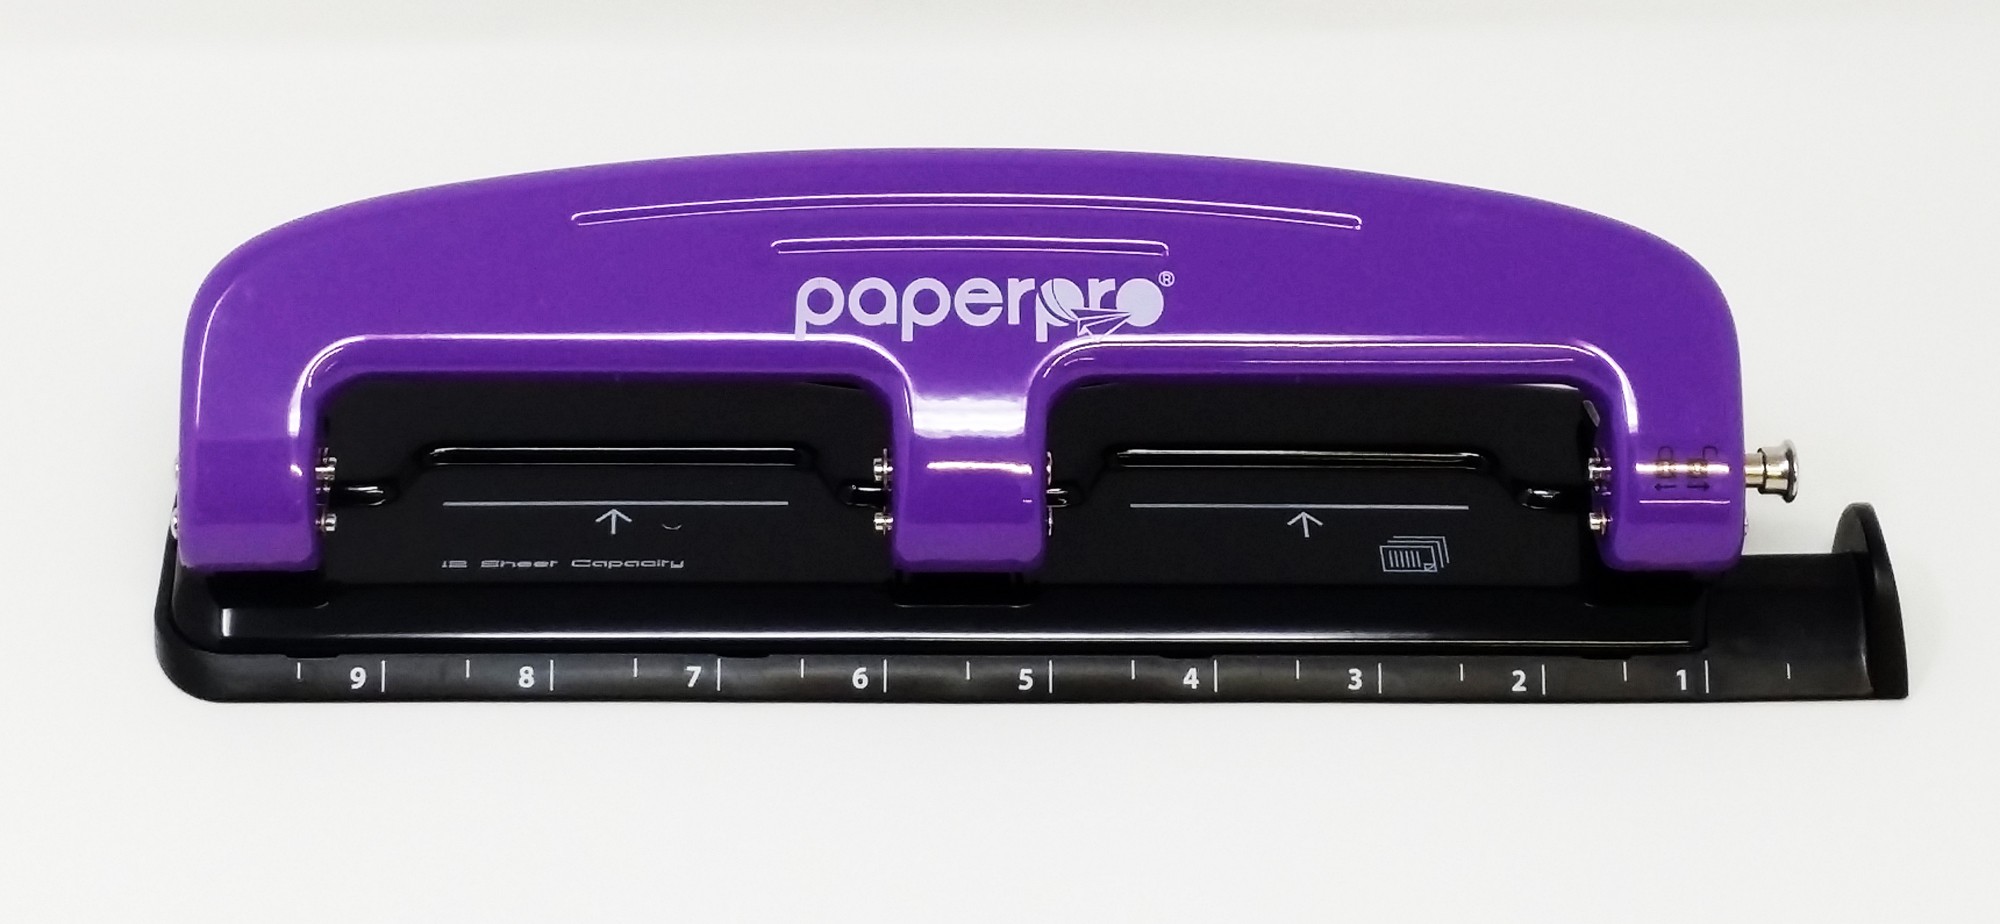 Bostitch EZ Squeeze 12 Three-Hole Punch - 3 Punch Head(s) - 12 Sheet - 9/32" Punch Size - 3" x 1.6" - Purple, Black